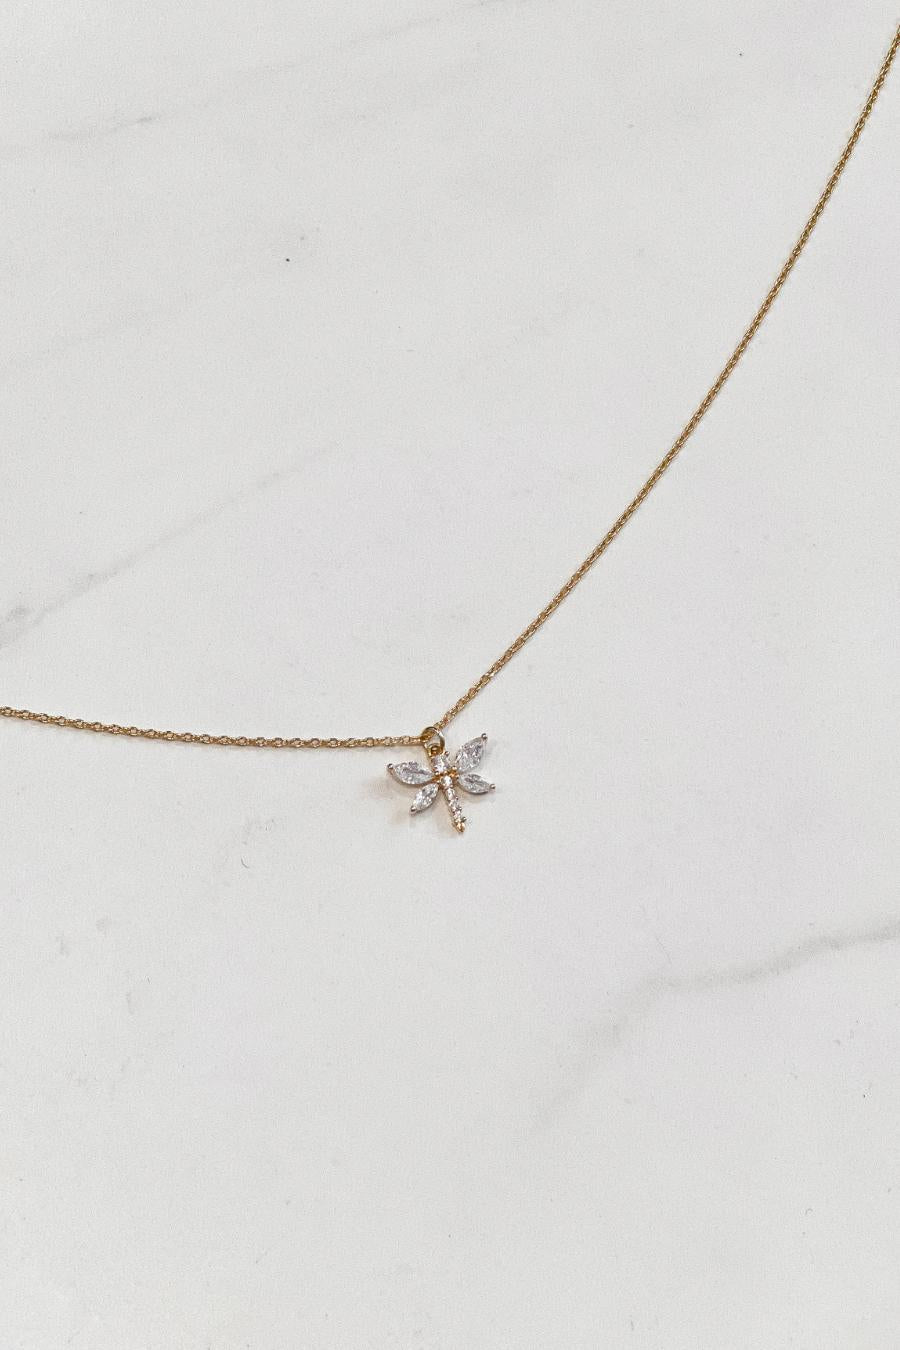 Stone Dragonfly Necklace- Gold